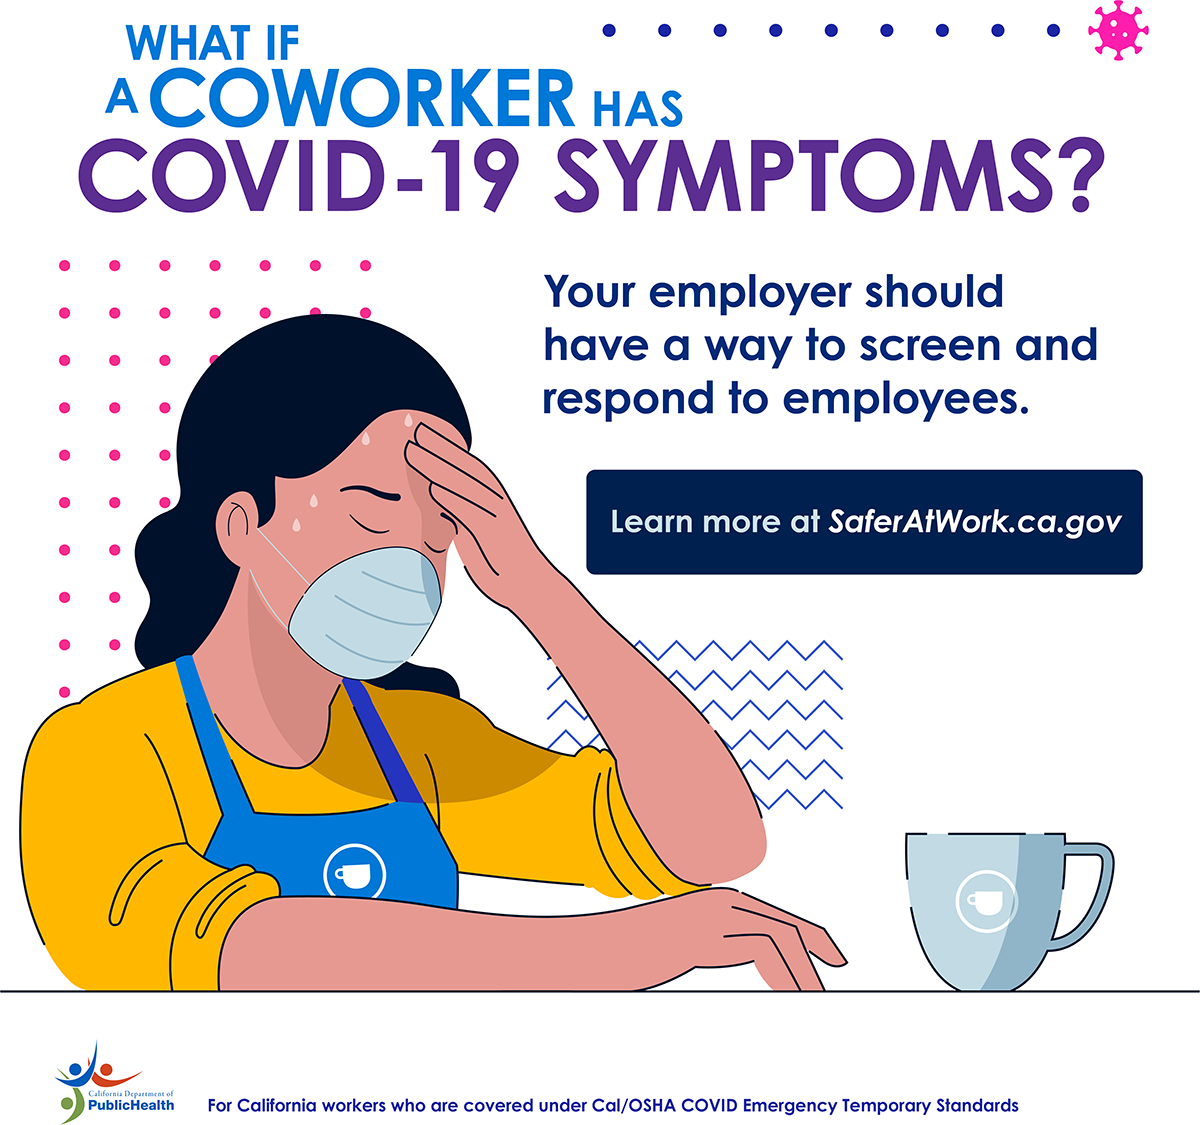 What if a coworker has COVID-19 symptoms?